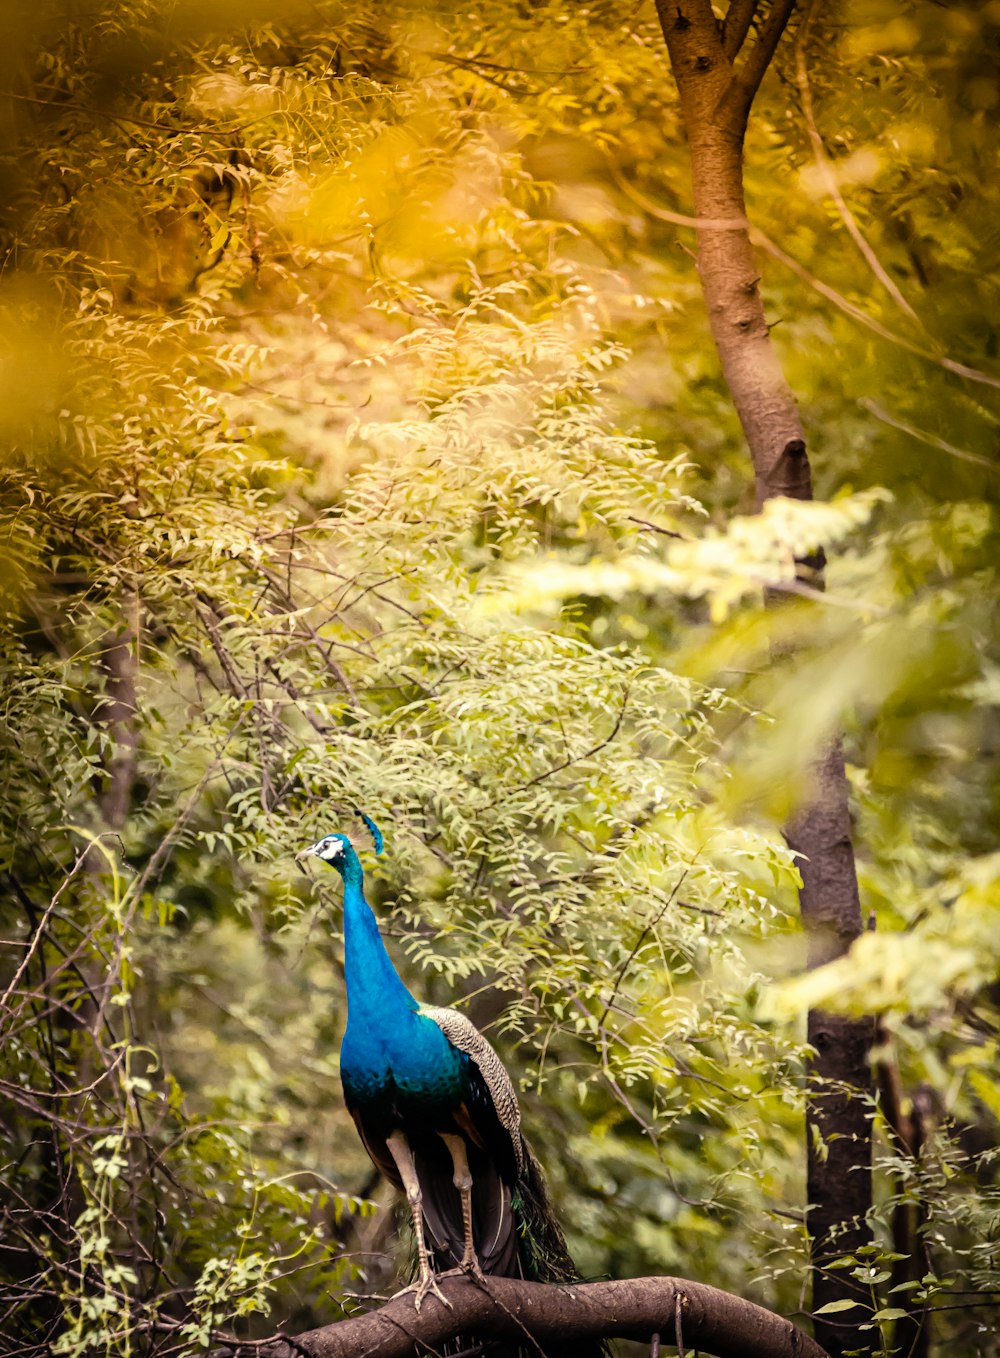 blue peacock on green tree branch during daytime